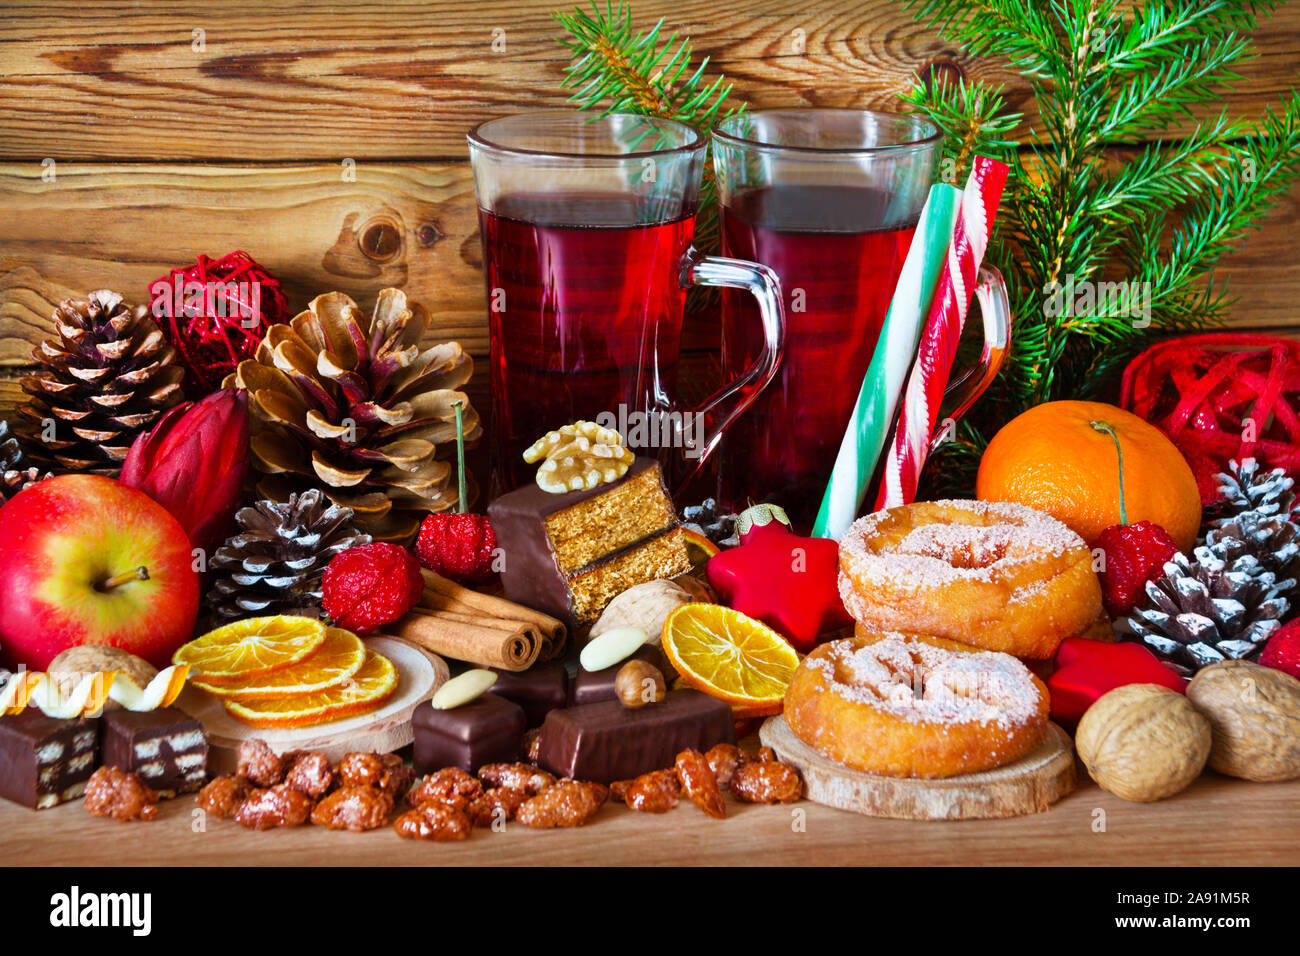 Hot spiced wine and food Stock Photo